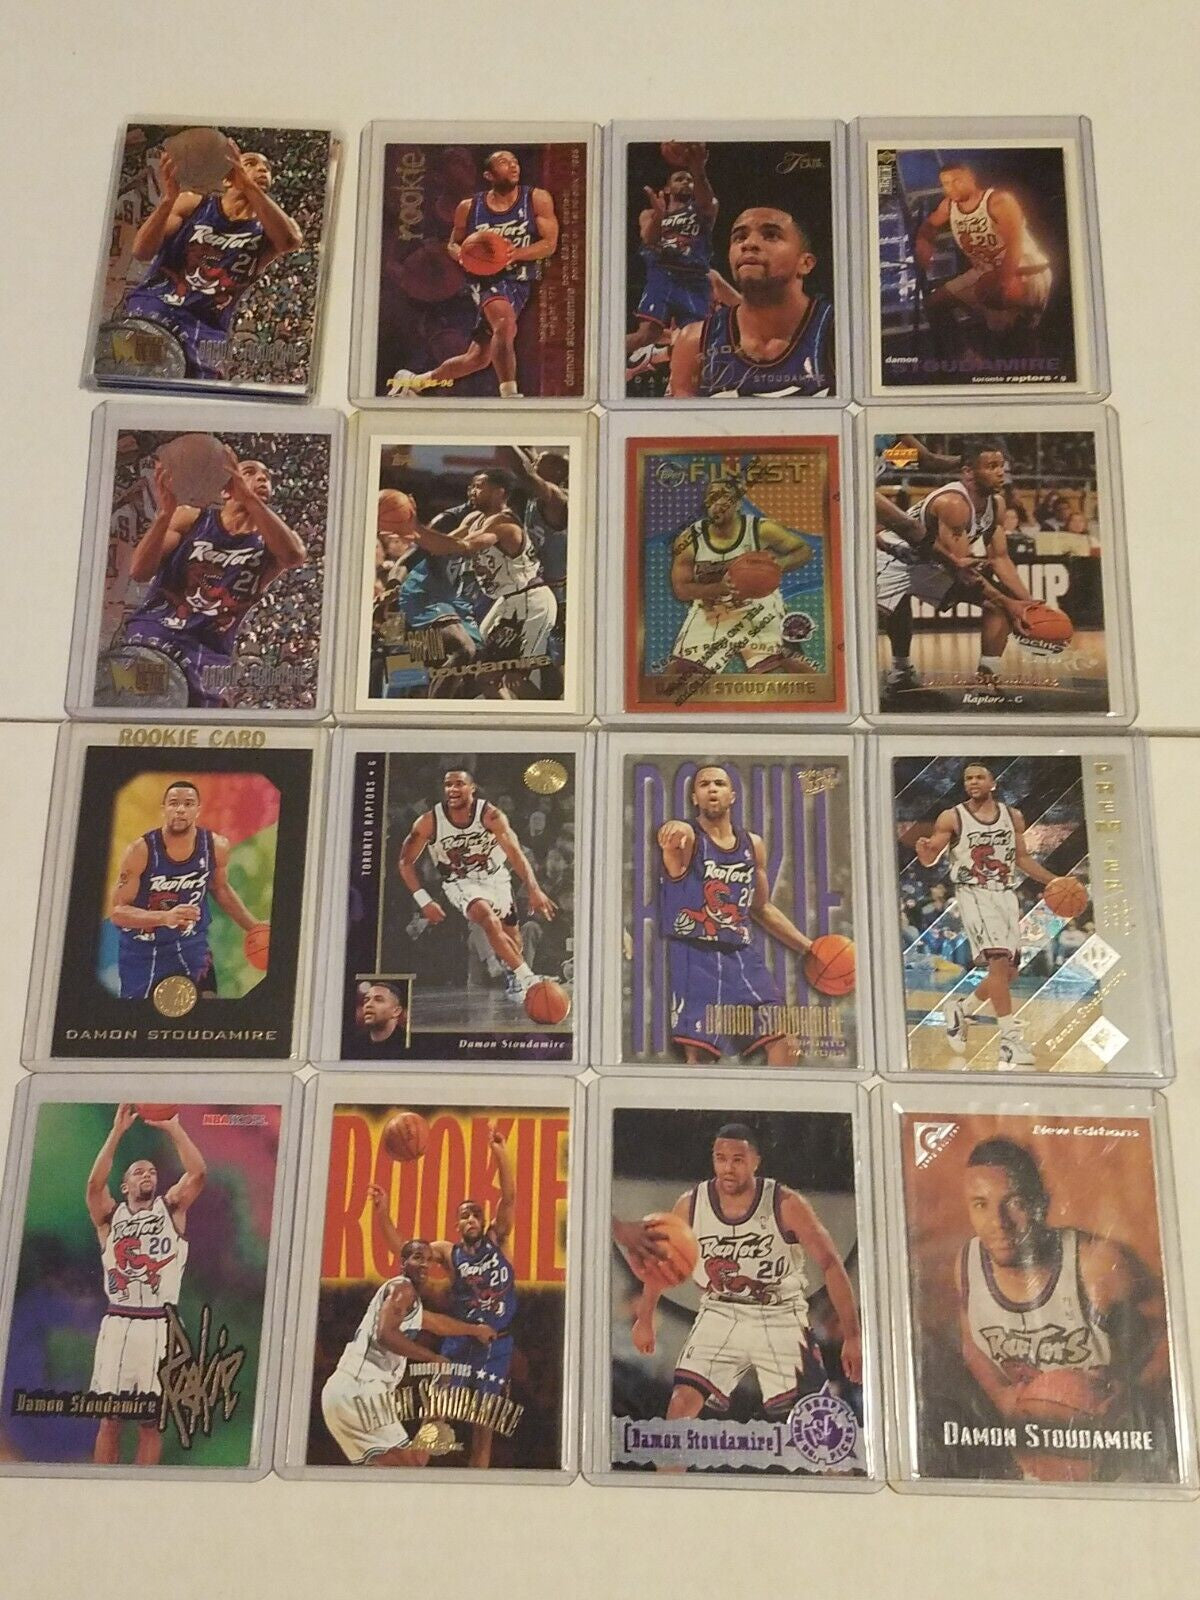 1995-96 Damon Stoudamire Toronto Raptors RC (Rookie Card)(1x Randomly Selected RC, May Not Be In Picture)